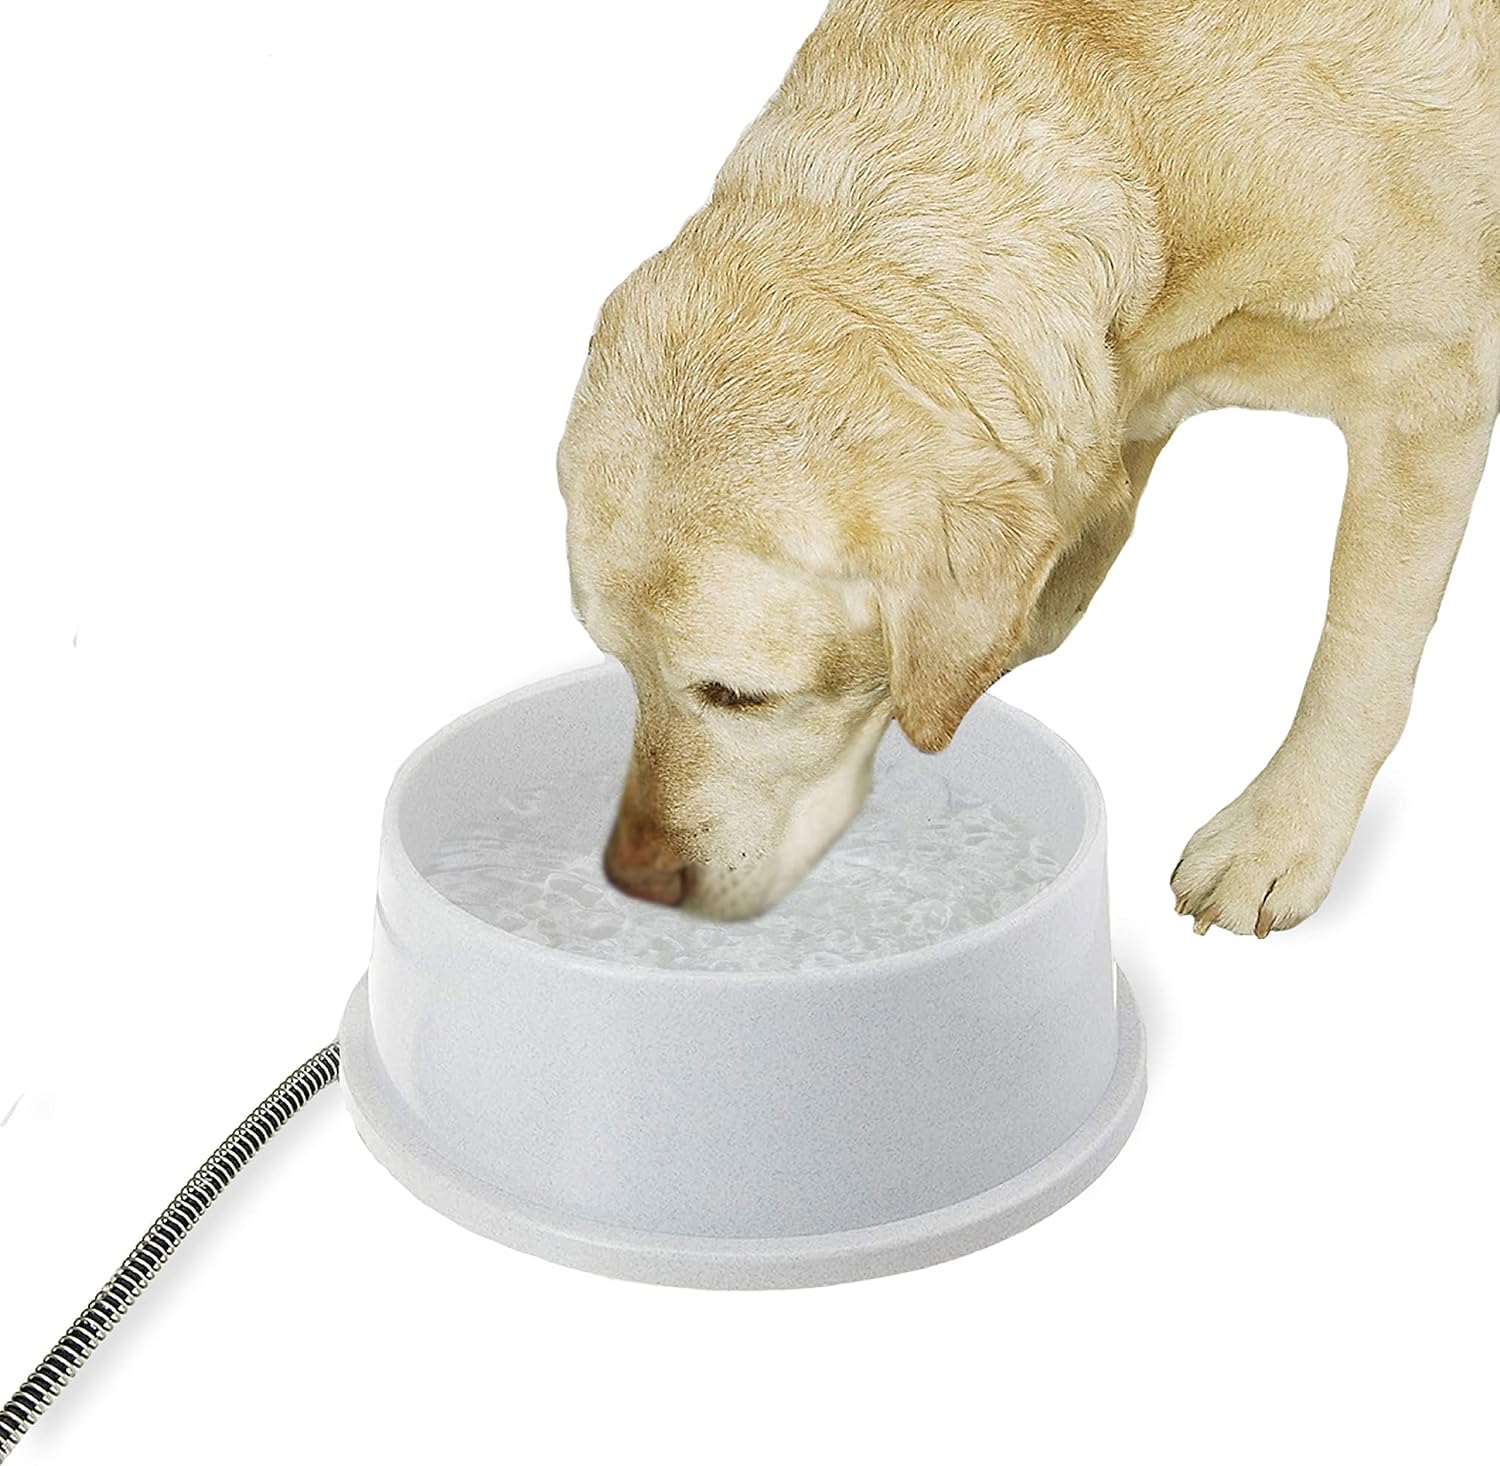 K&H Pet Products Thermal Bowl